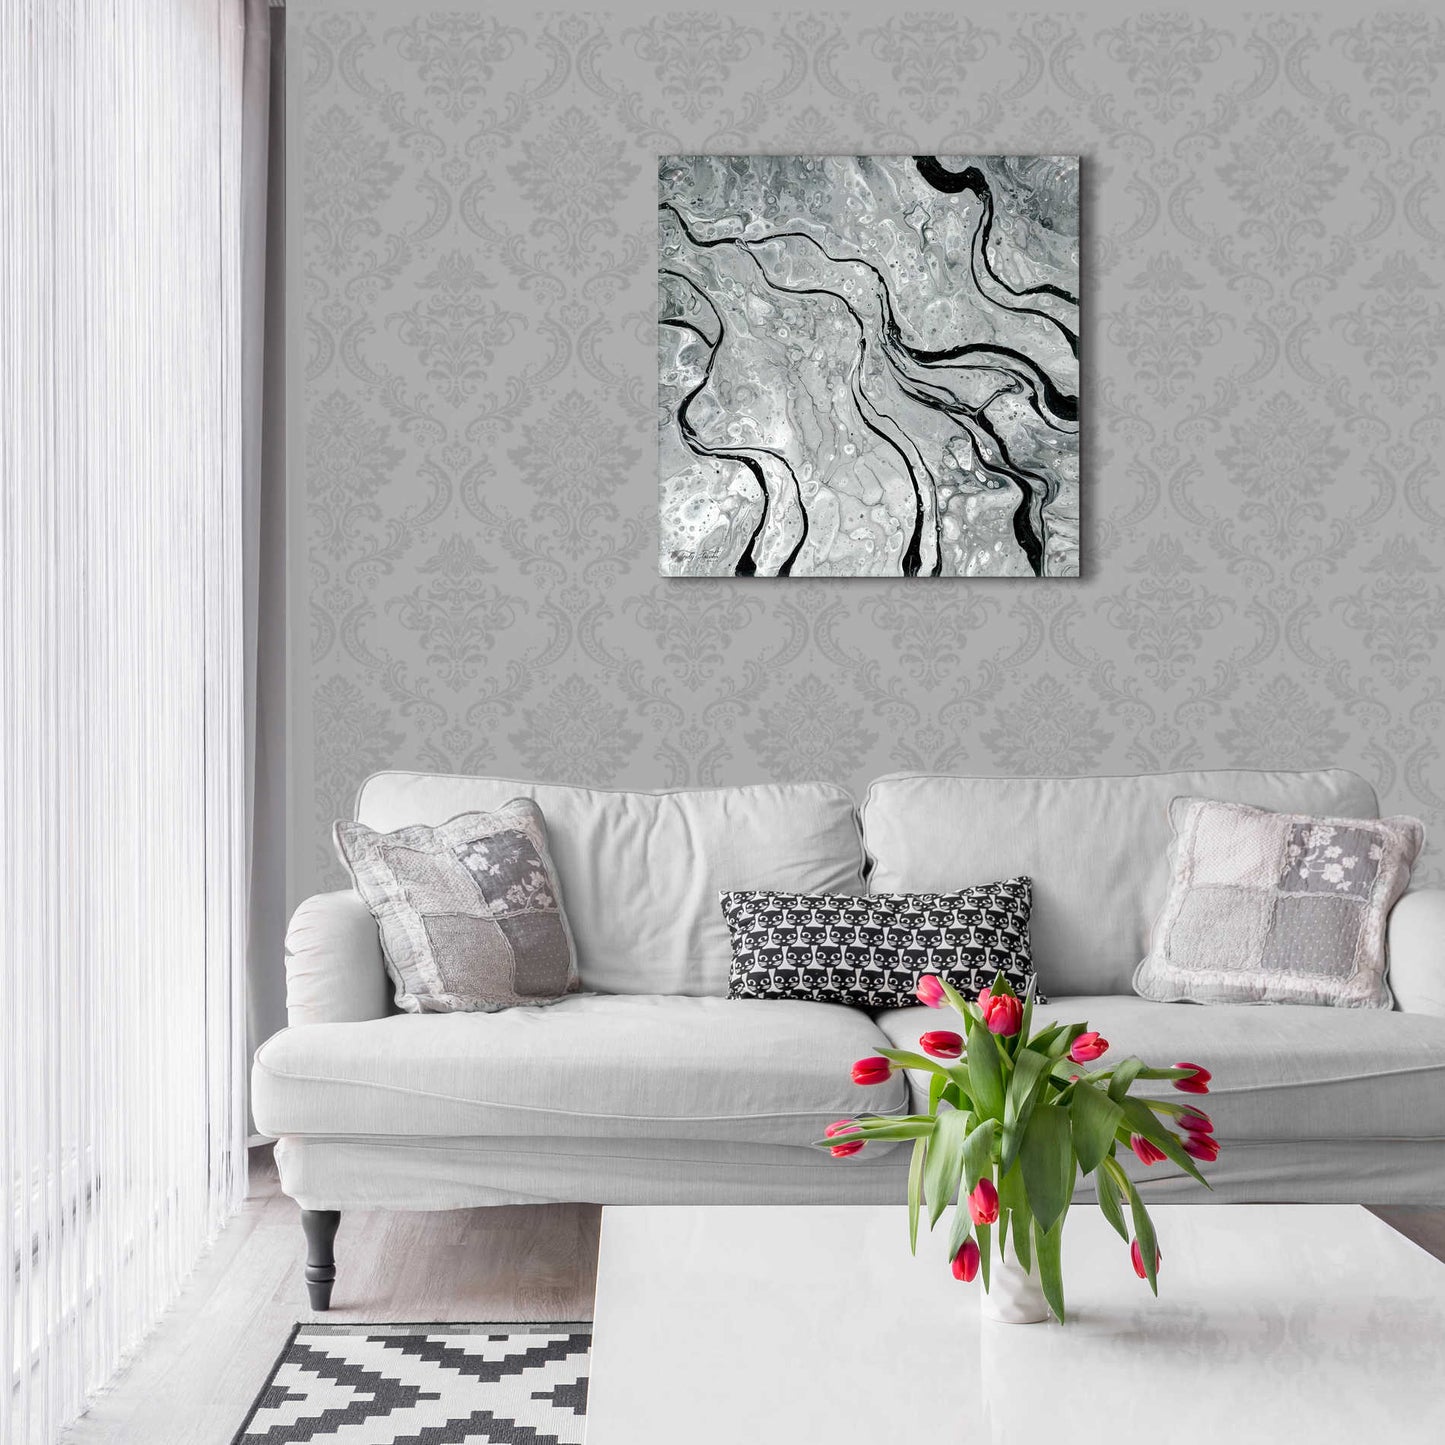 Epic Art 'Abstract in Gray V' by Cindy Jacobs, Acrylic Glass Wall Art,24x24